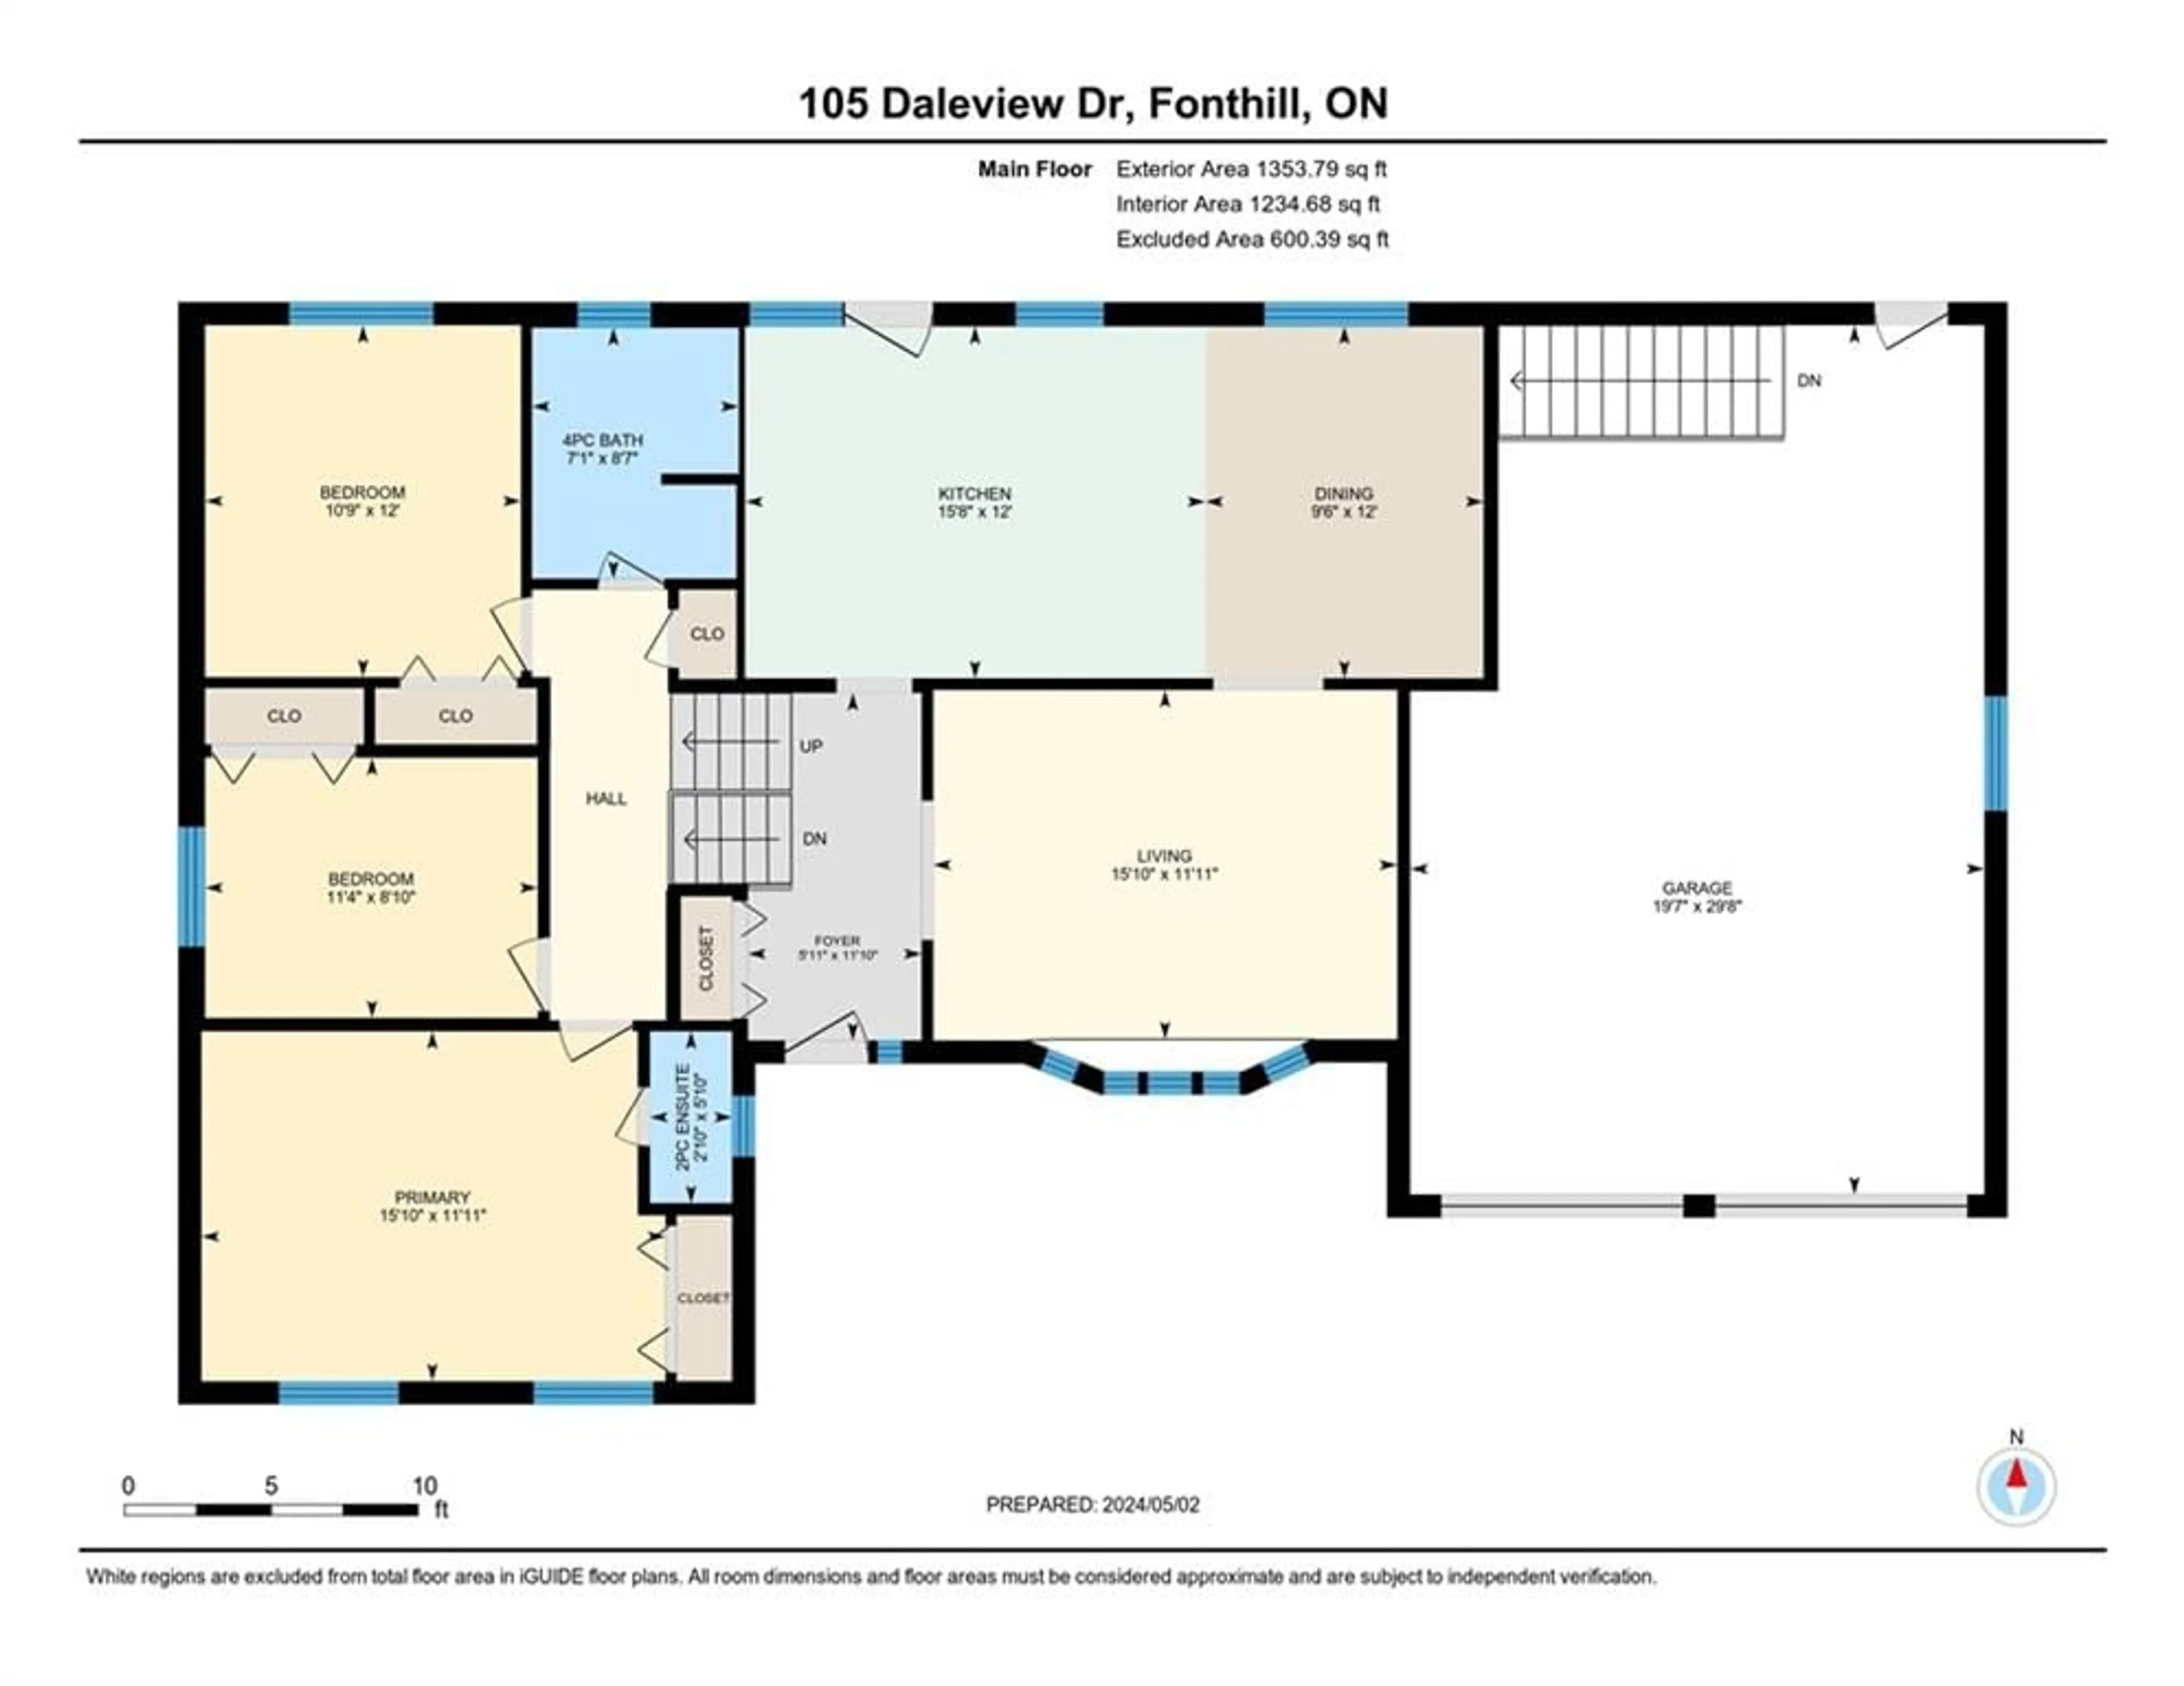 Floor plan for 105 DALEVIEW Dr, Fonthill Ontario L0S 1E0